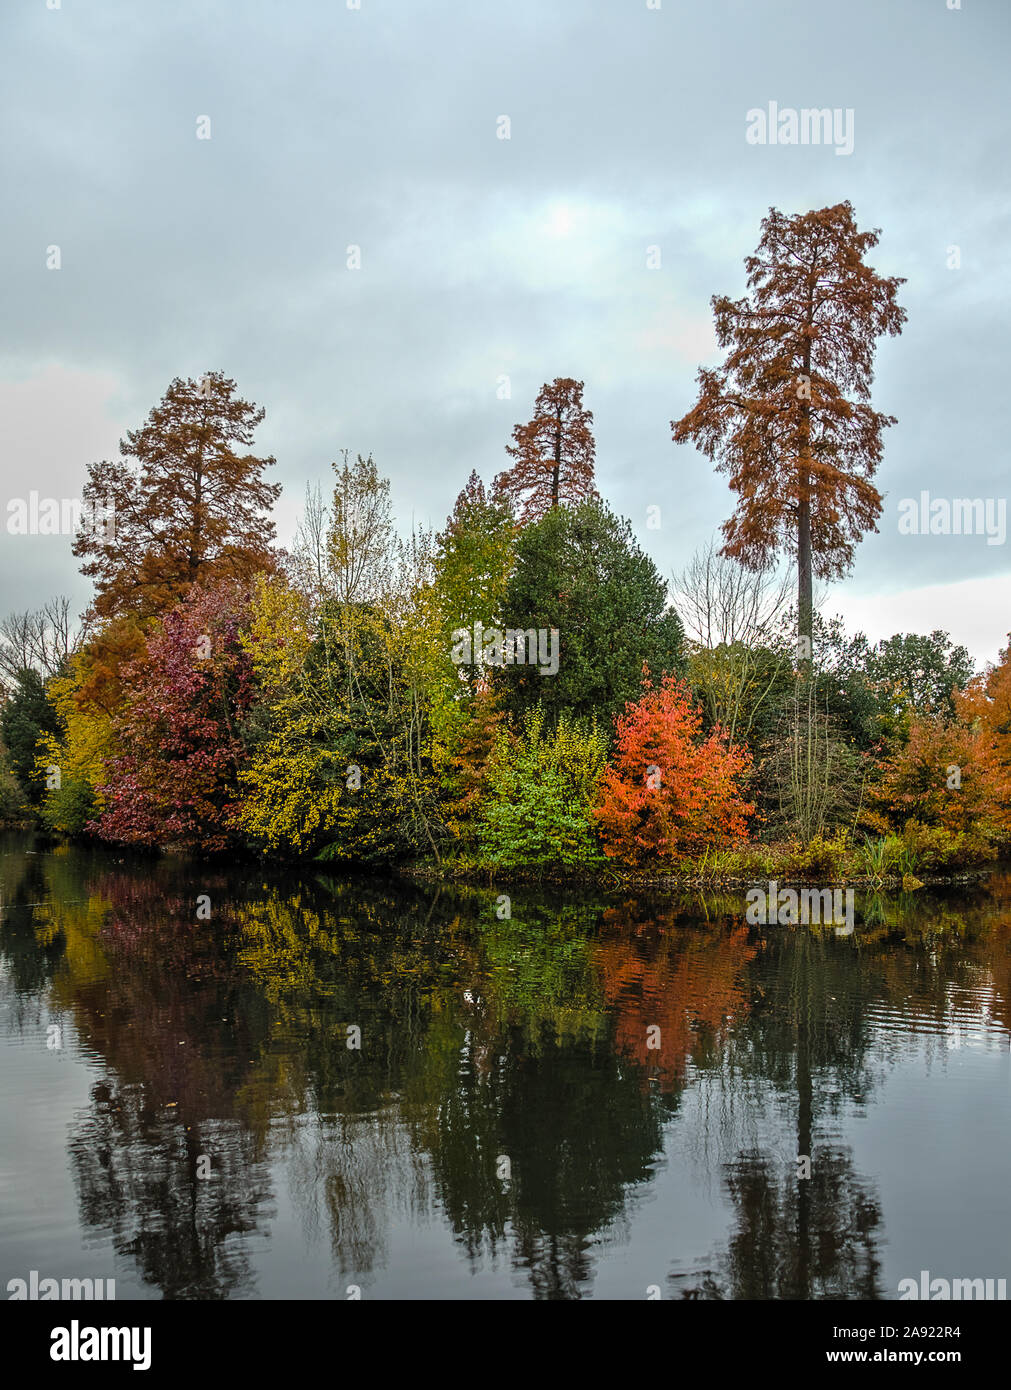 The lovely colours of Autumn foliage are reflected in the waters of a pond in Kew Gardens, London. Stock Photo